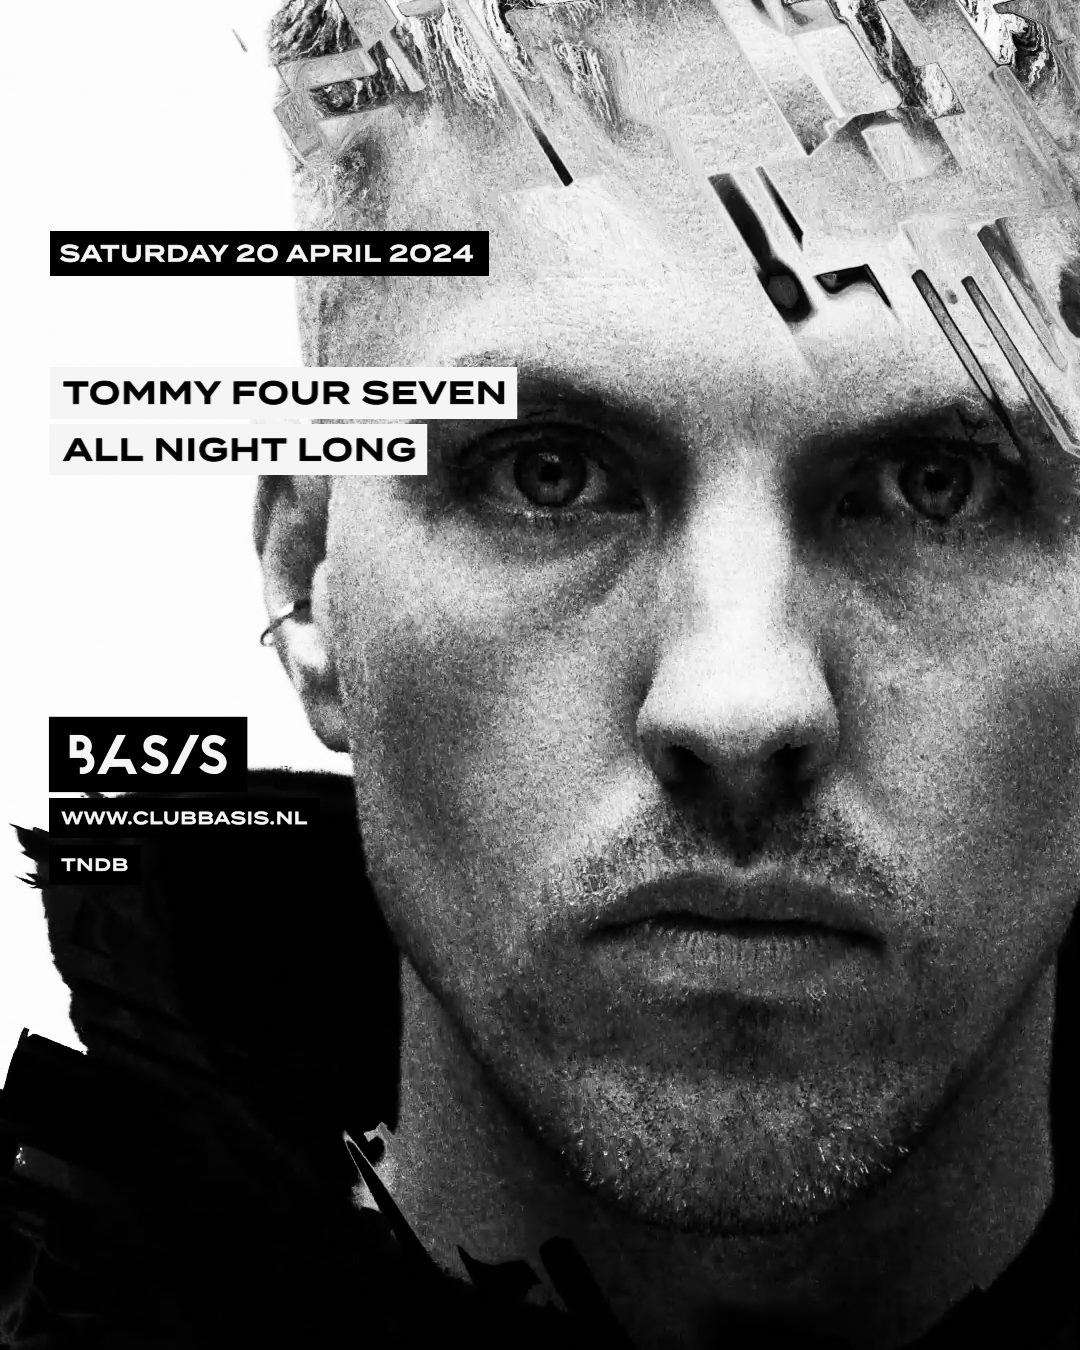 BASIS/ Tommy Four Seven all night long - Página frontal